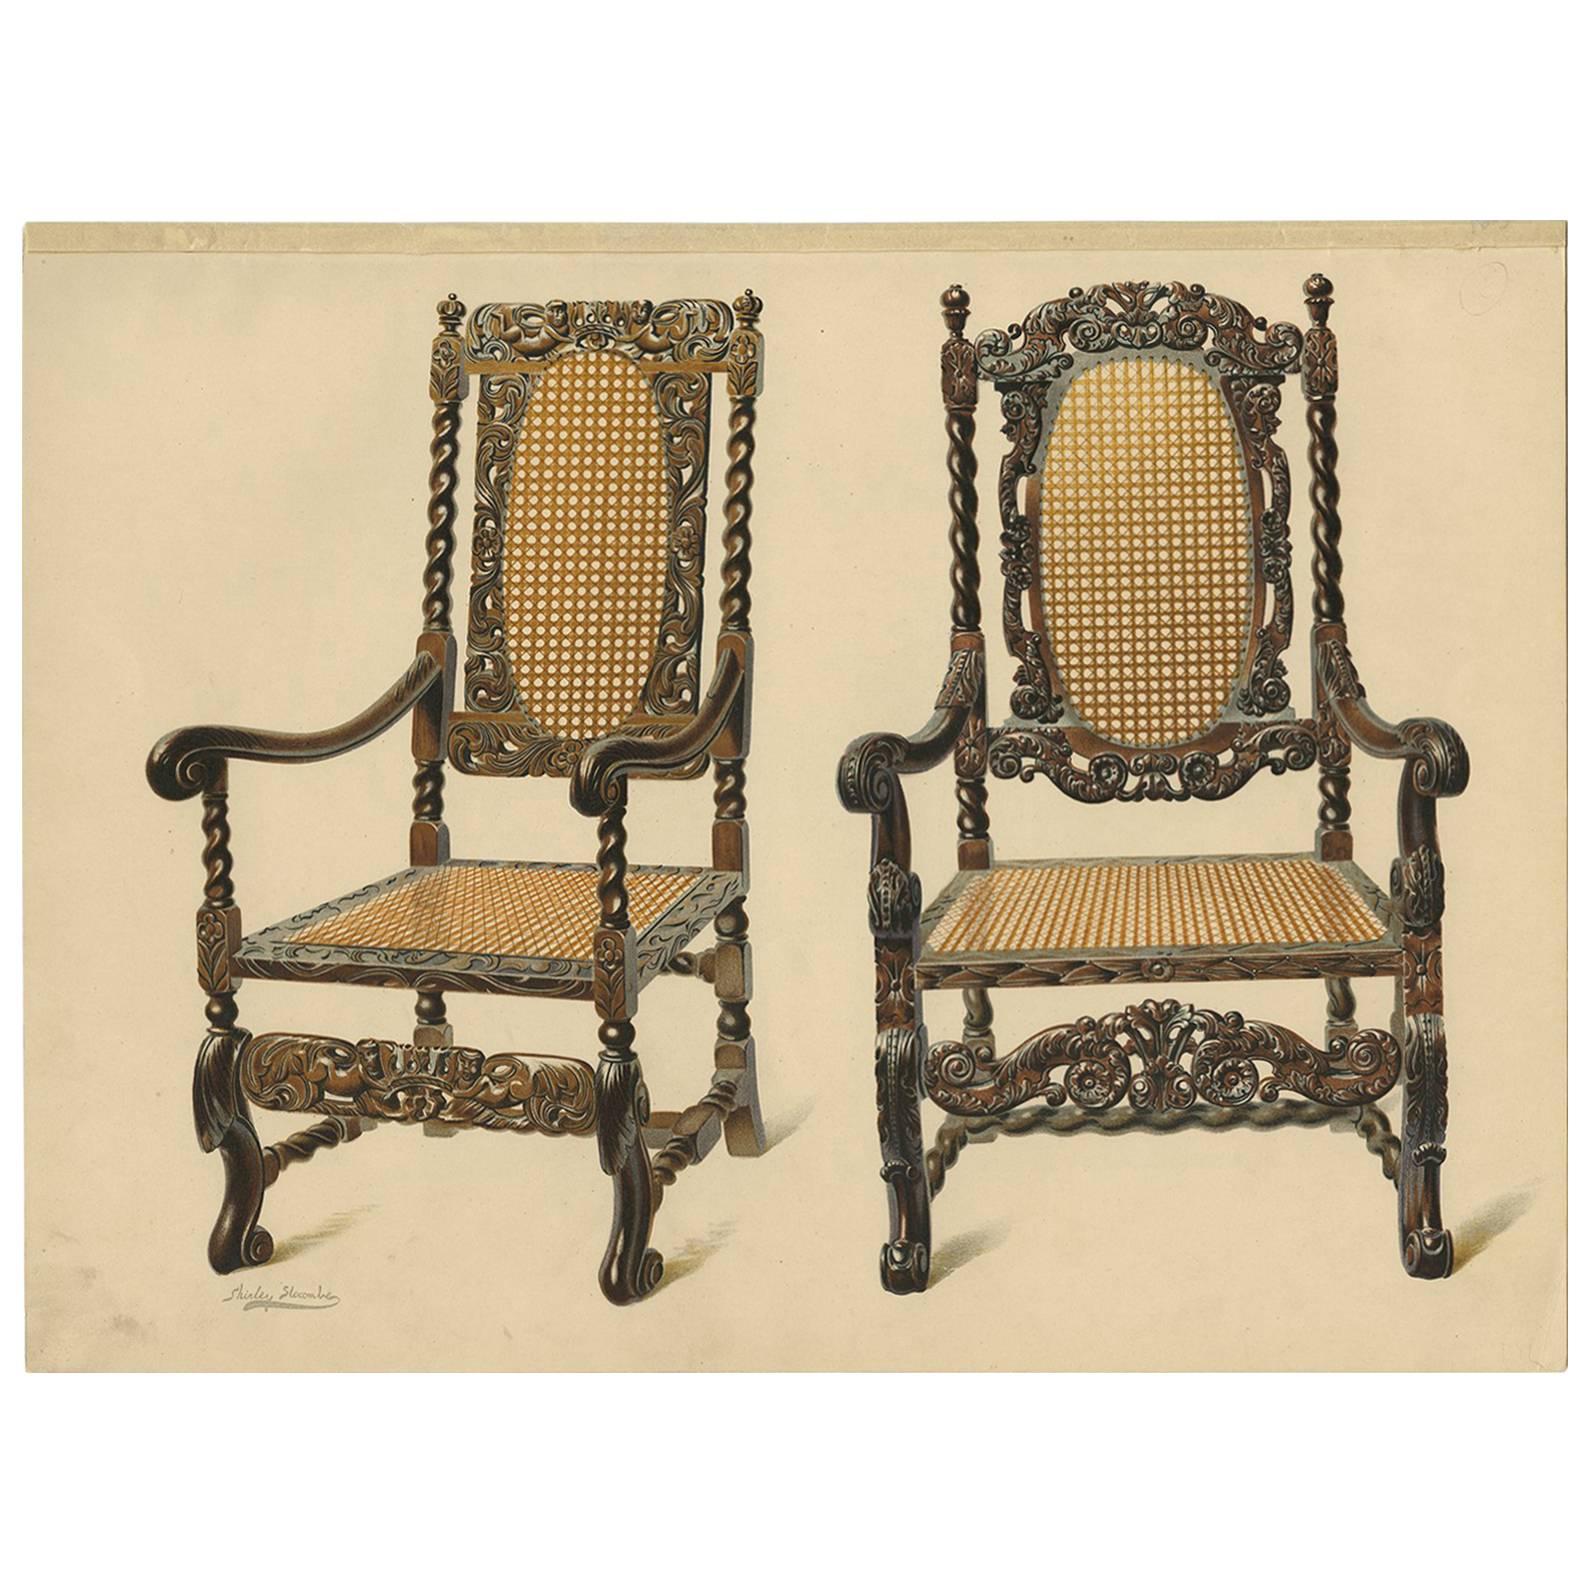 Antique Print of English Furniture 'Two Chairs' by P. Macquoid, 1906